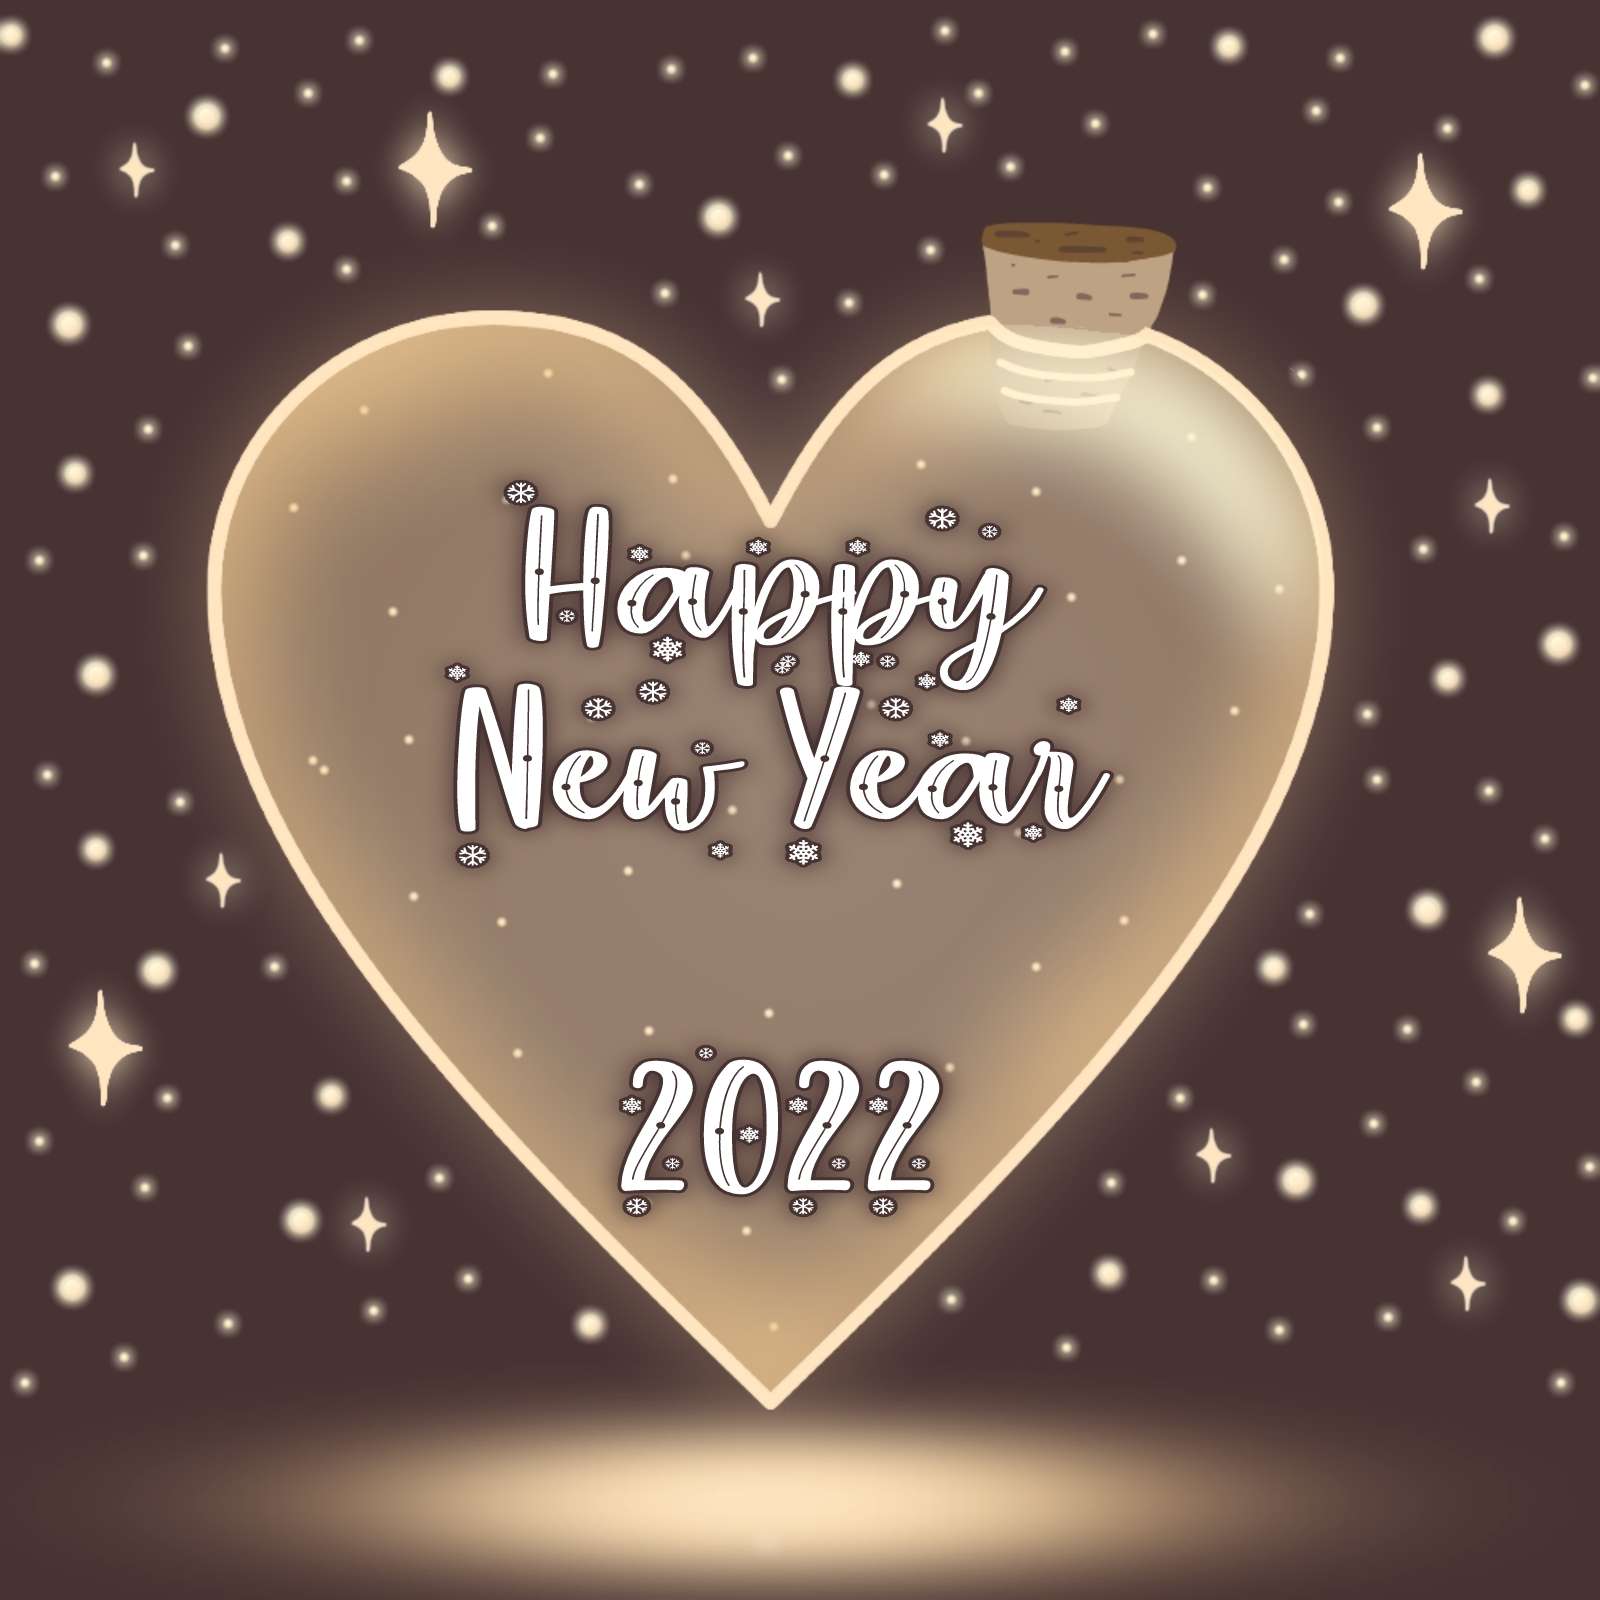 Happy New Year 2022 Images for GF BF